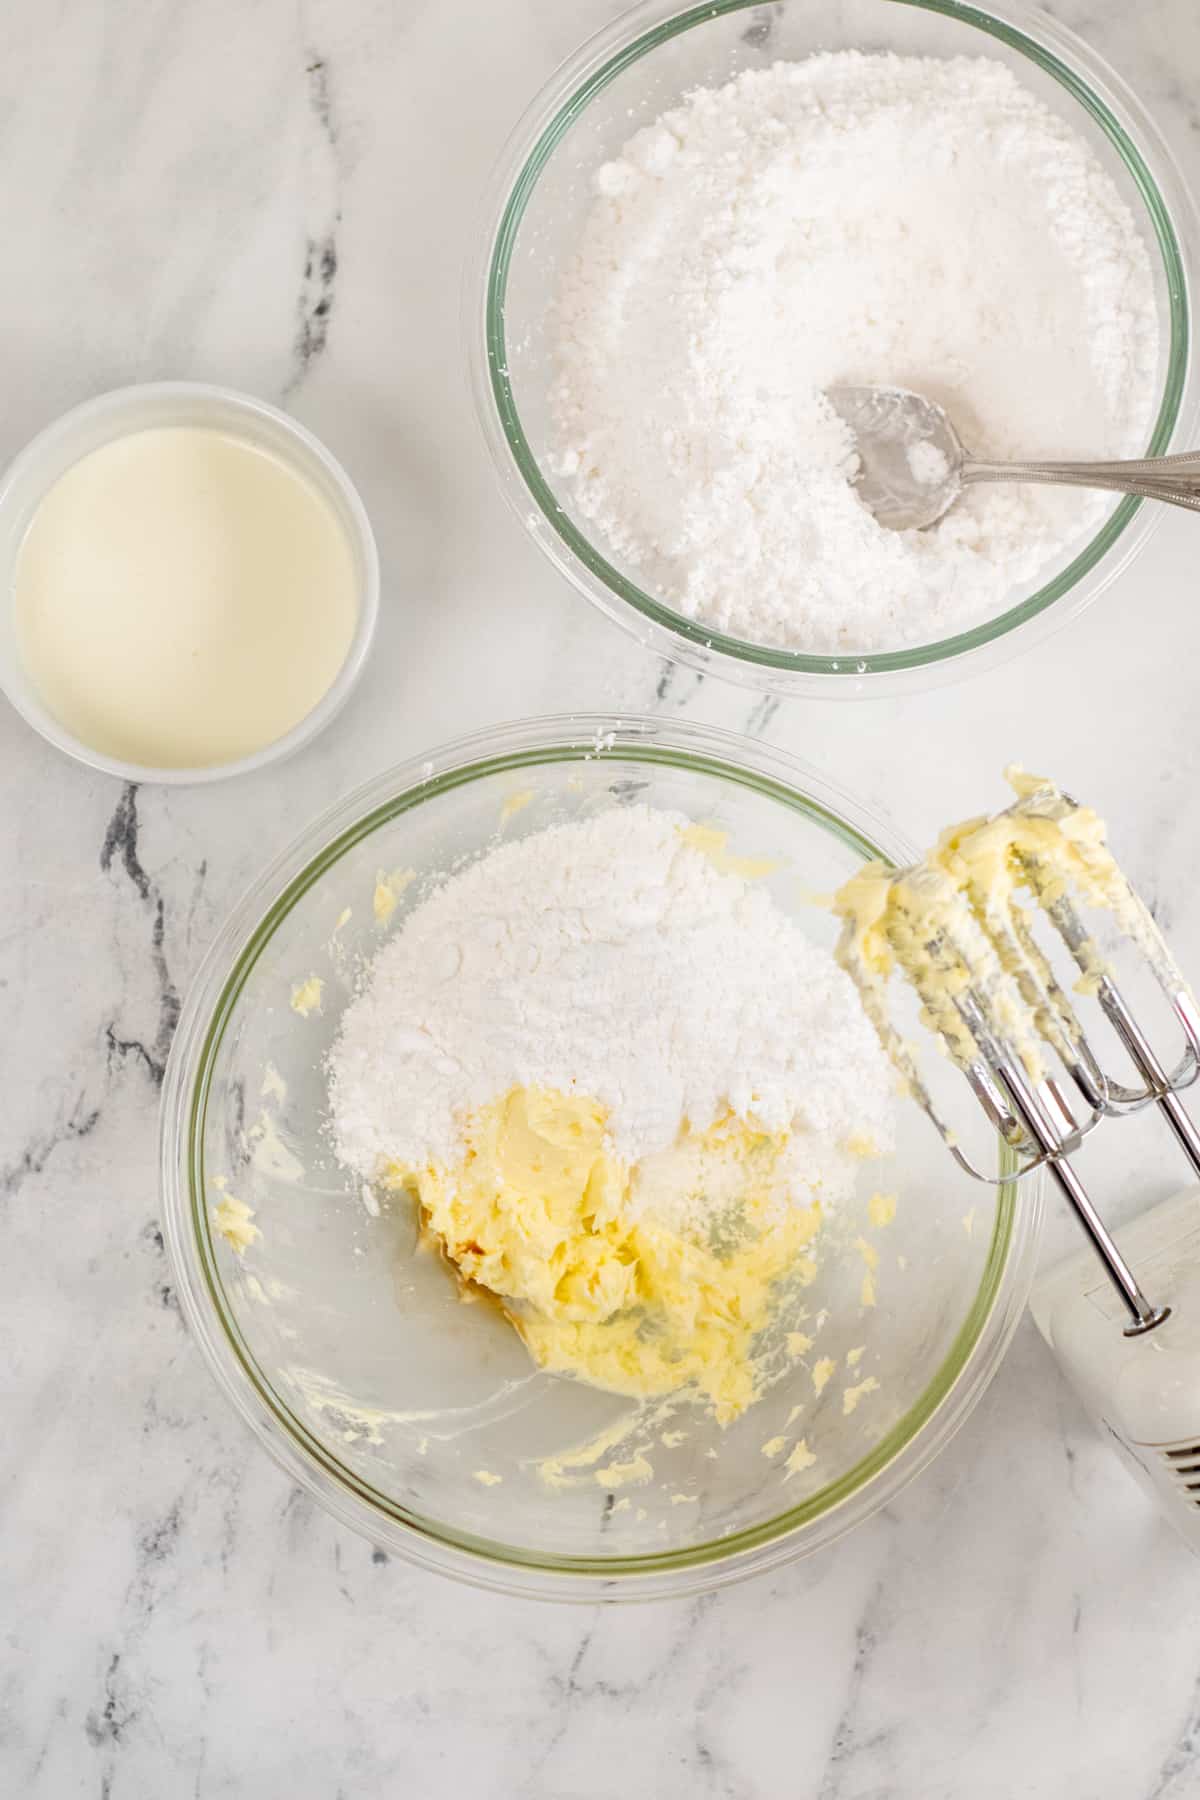 Large glass mixing bowl with creamed butter, powdered sugar, and hand mixer